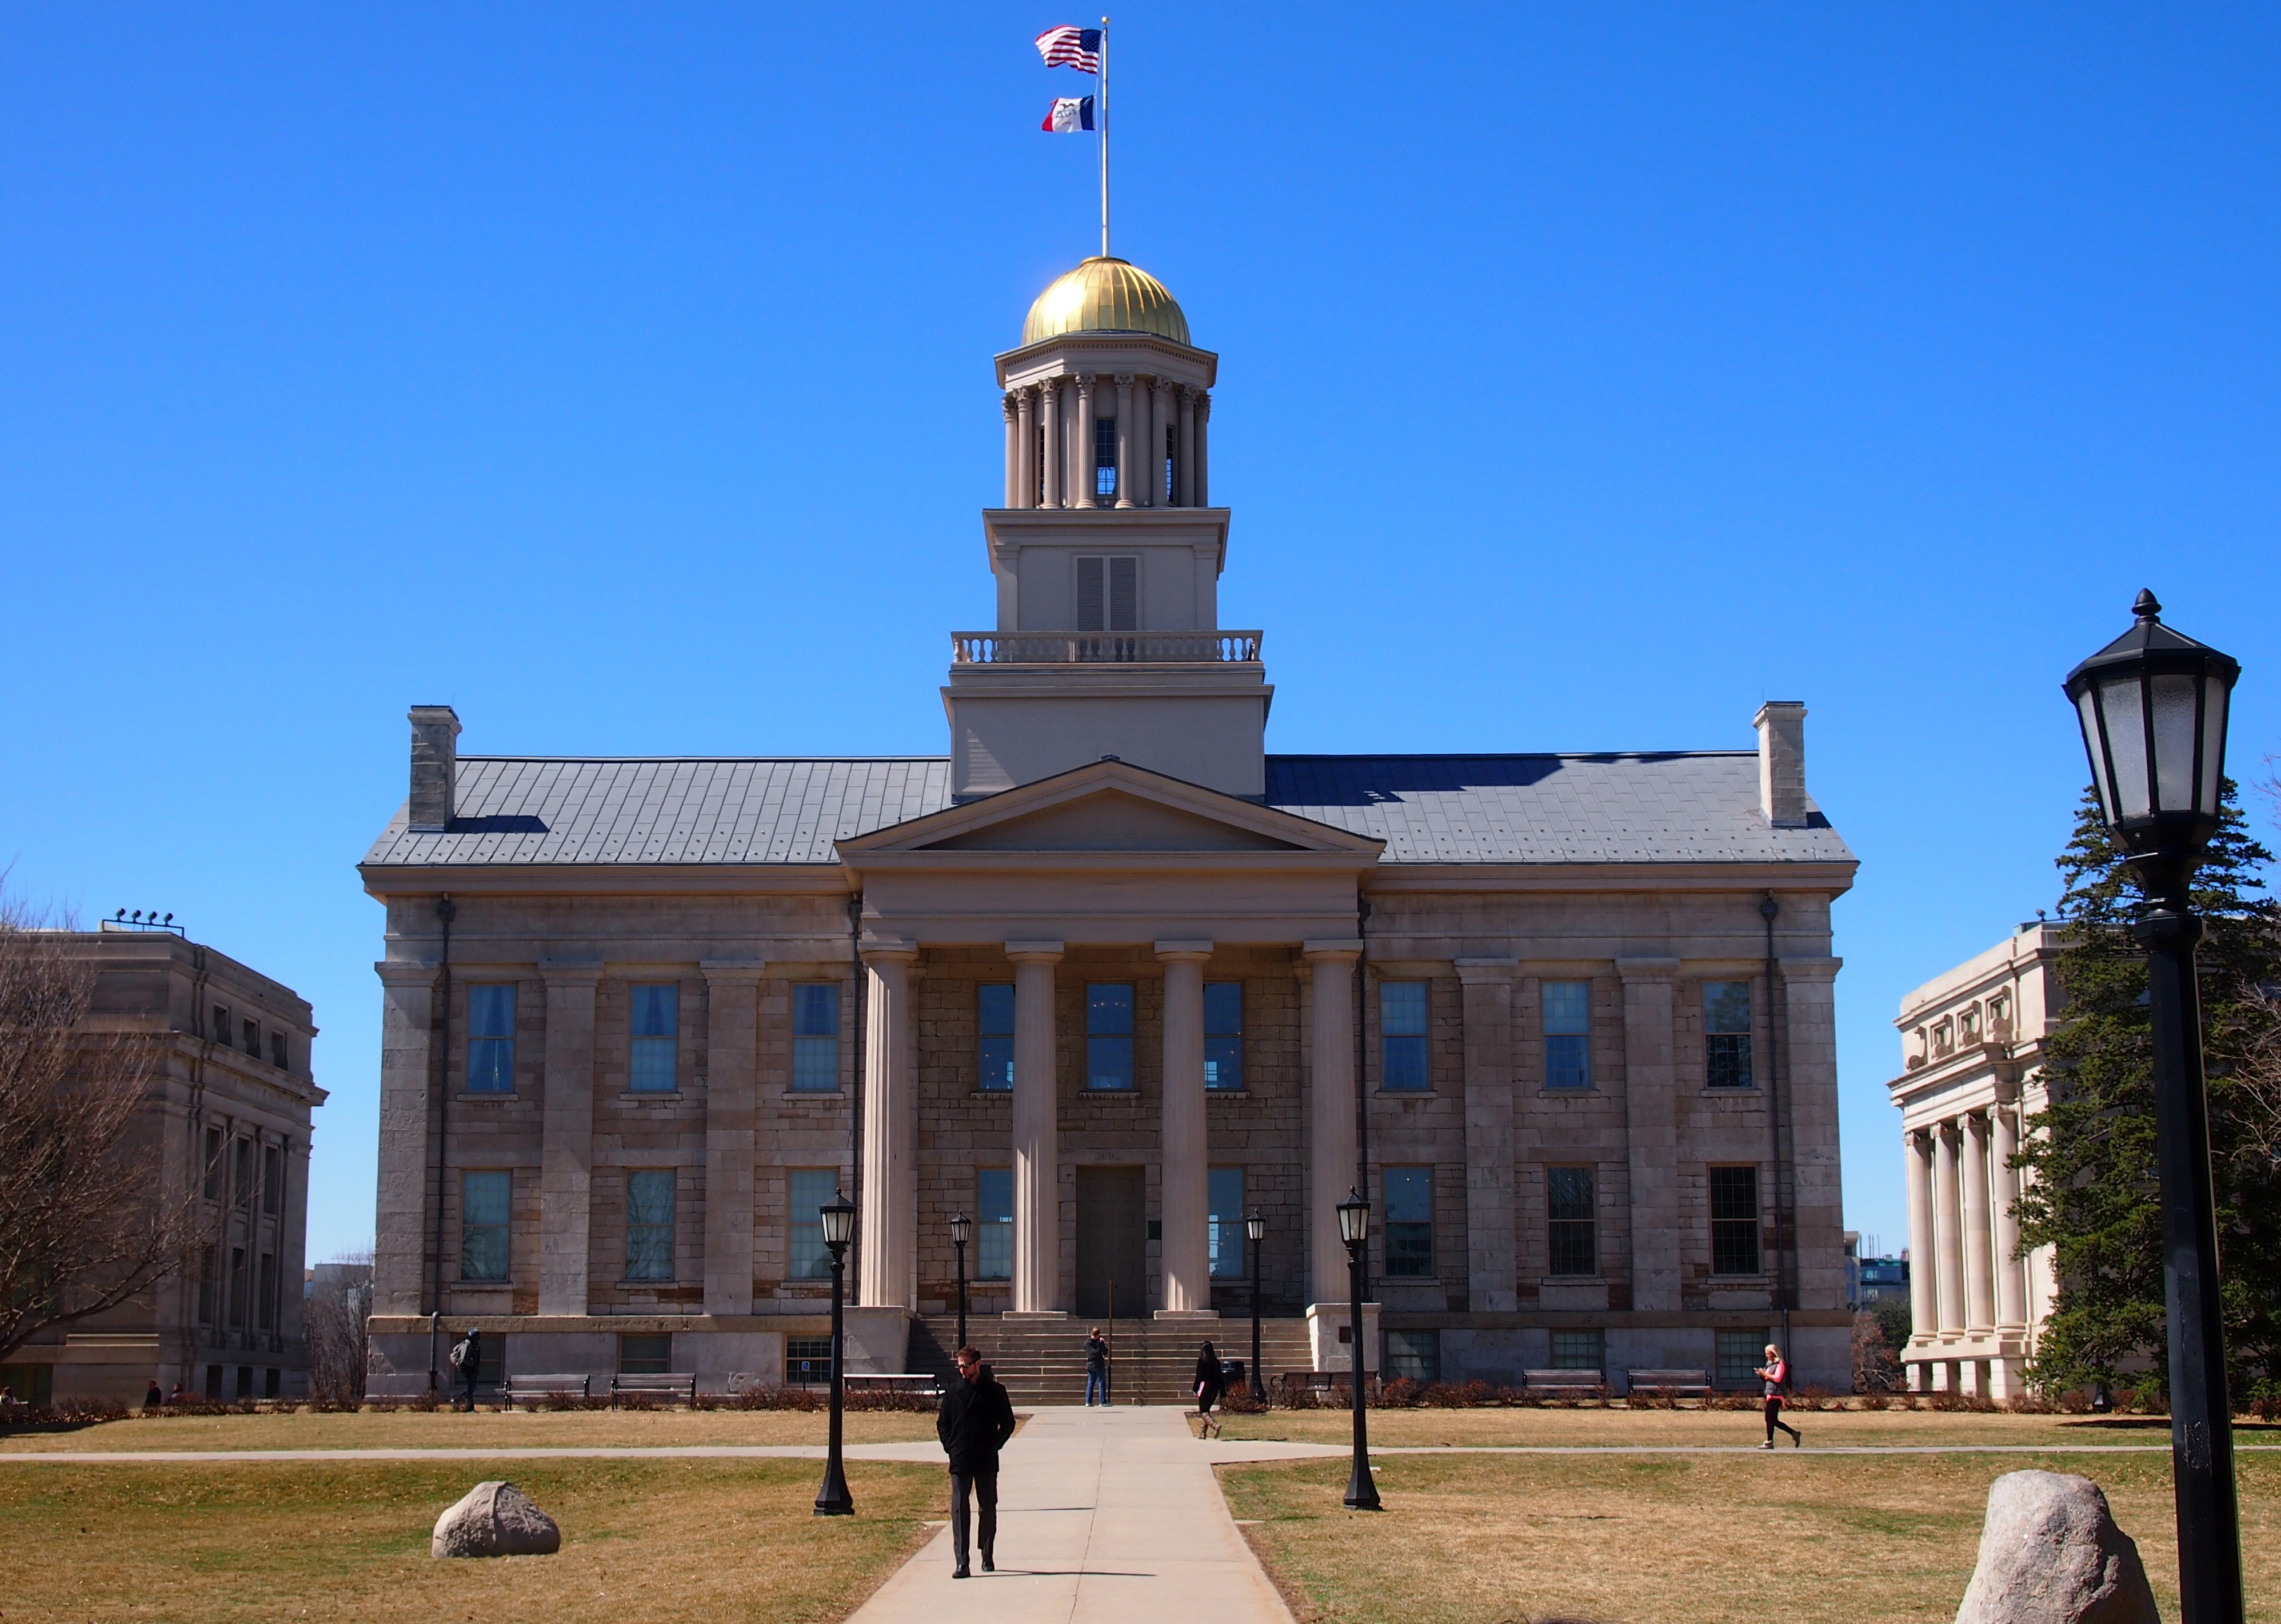 Old Capitol, Iowa City, March 27, 2015